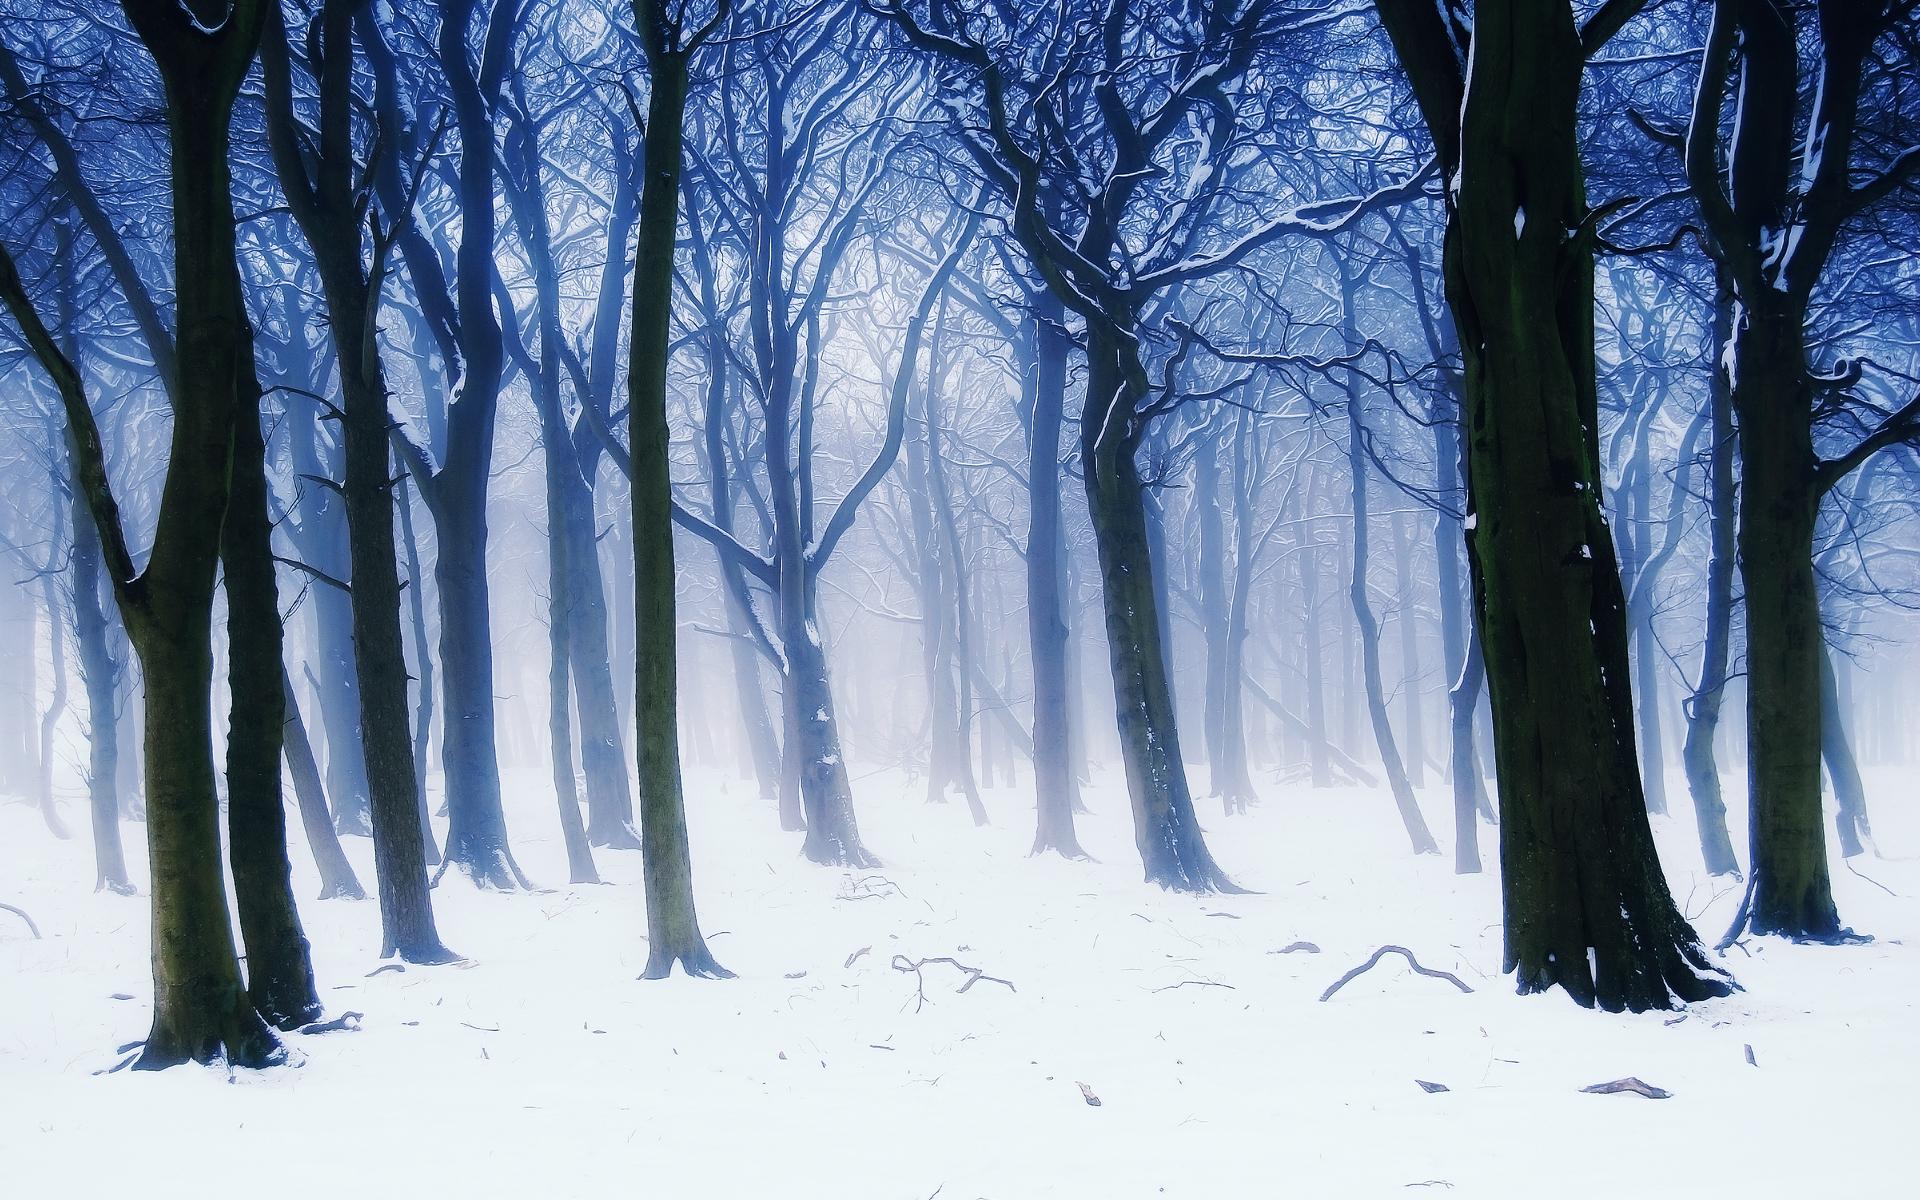 nature, Landscapes, Trees, Forest, Winter, Snow, Seasons, White, Cold, Haze, Fog, Artistic, Paintings, Cg, Digital Wallpaper